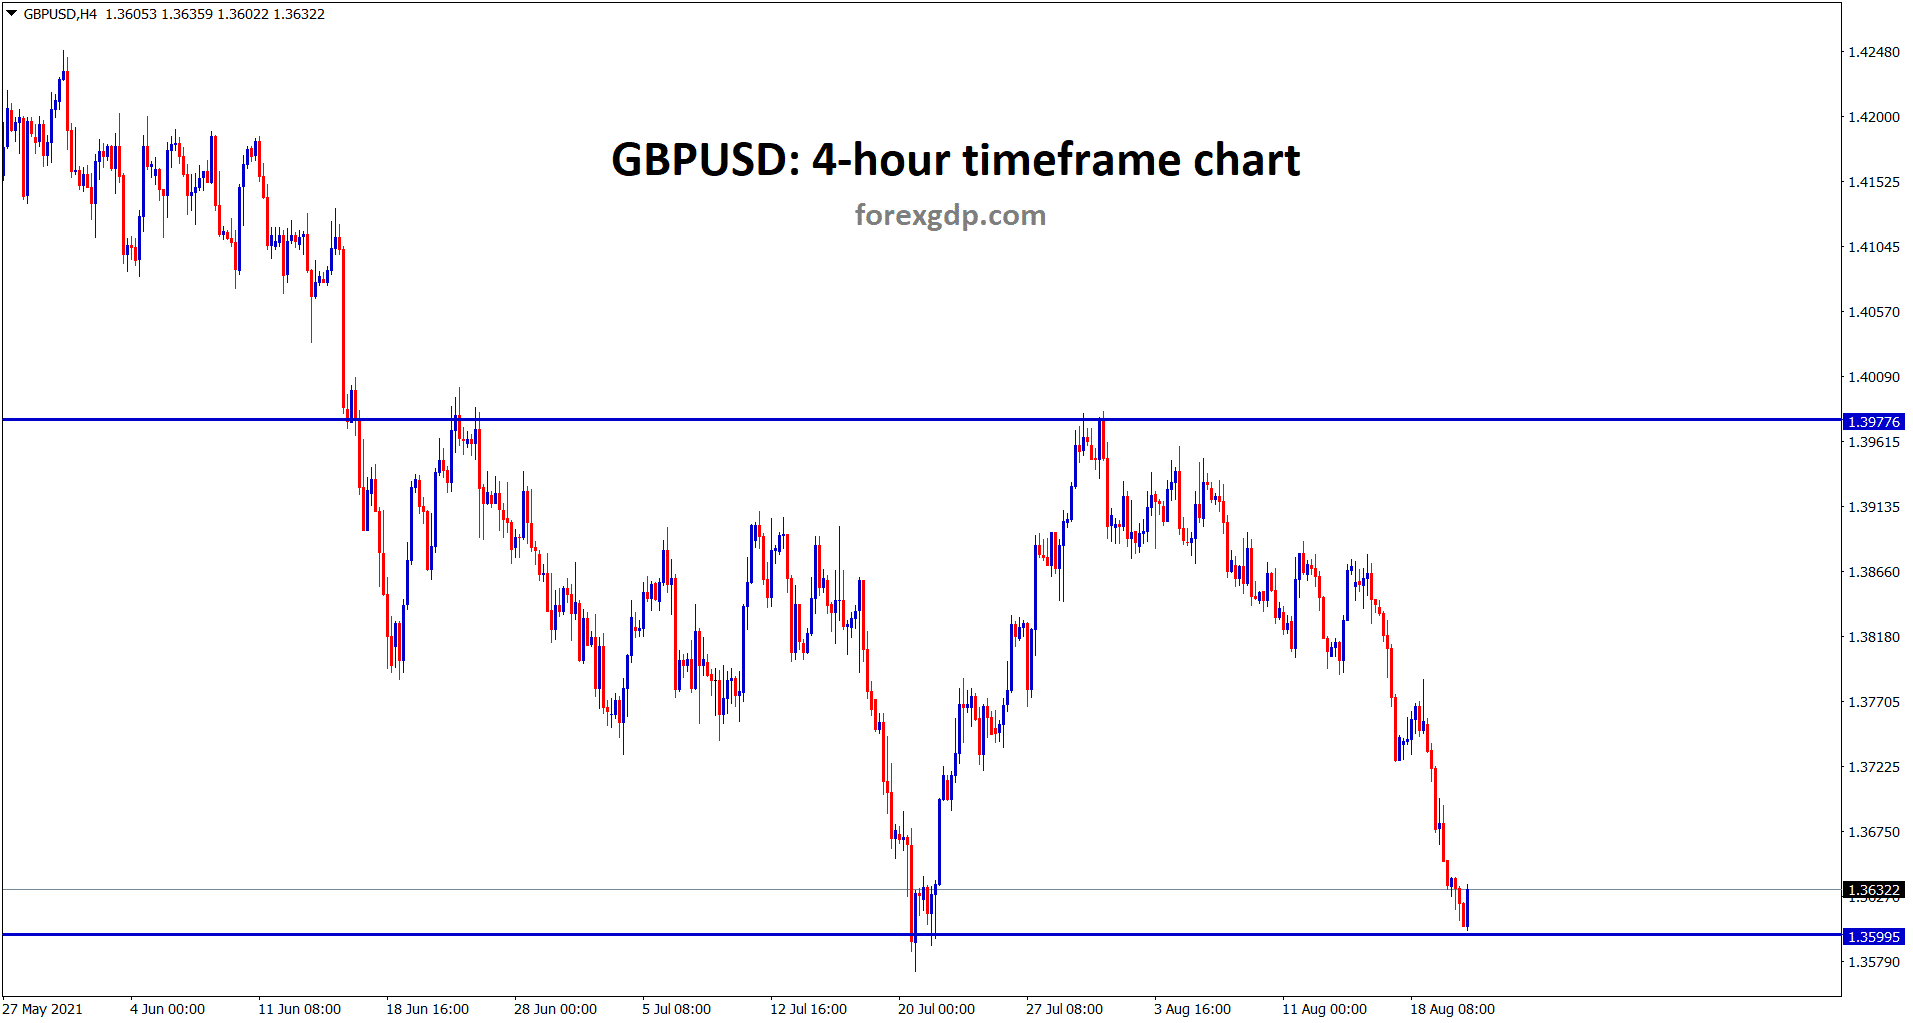 GBPUSD hits the support area wait for reversal or breakout